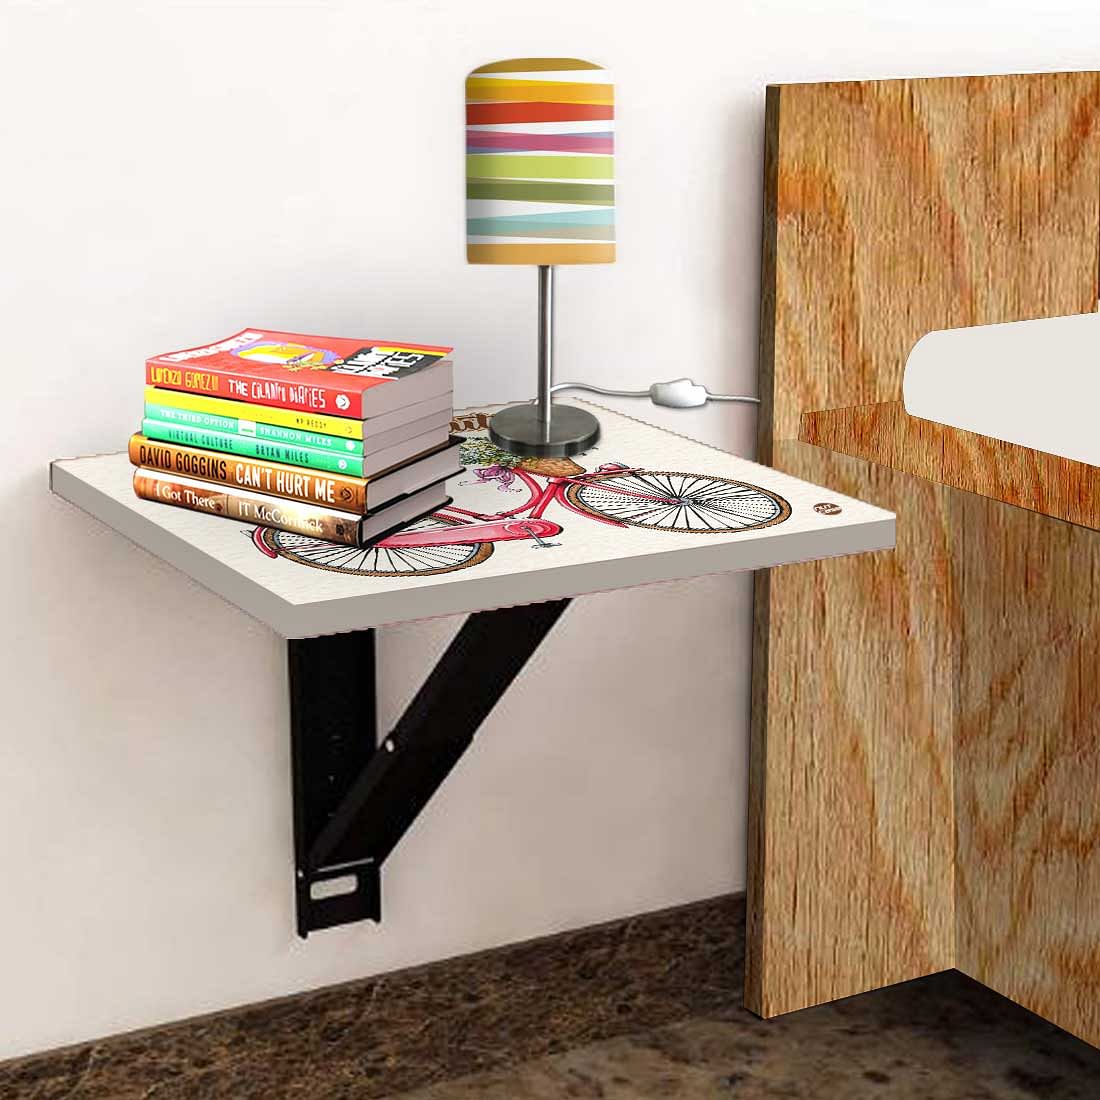 Bedside Table Floating - Life is Beautiful Cycle Nutcase